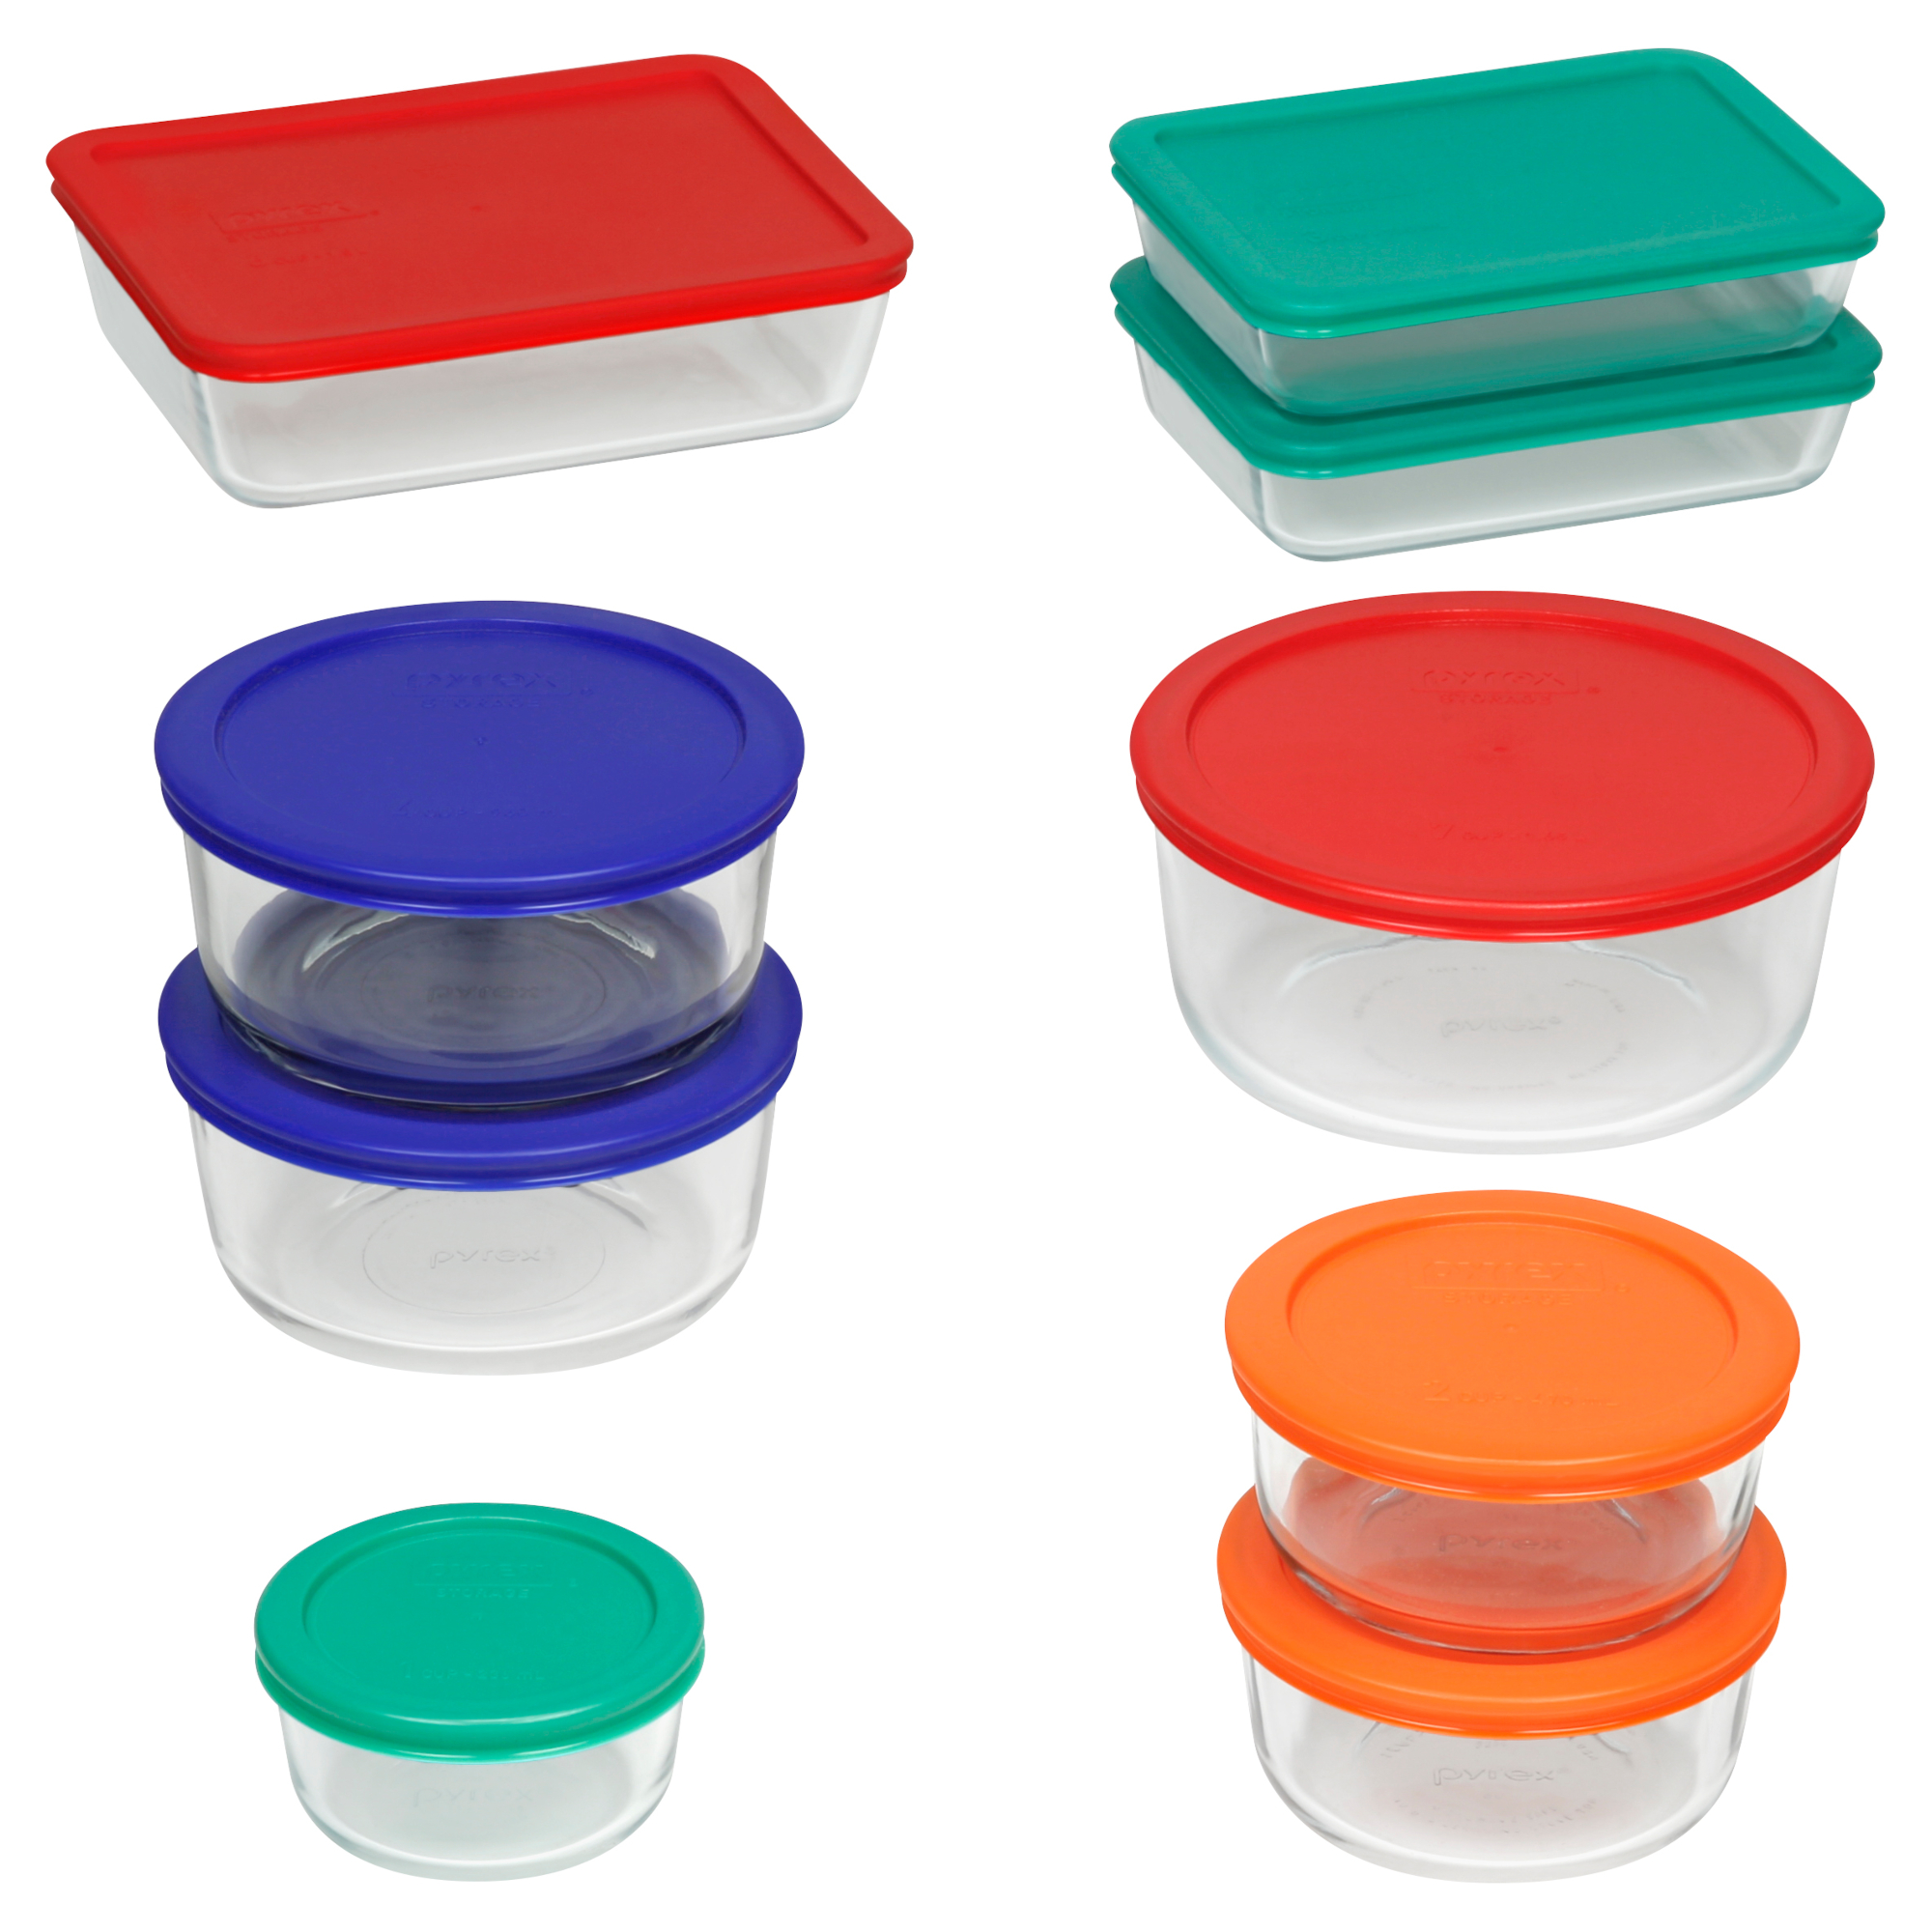 Pyrex 18-piece Glass Food Storage Container Set with Lids - image 3 of 9